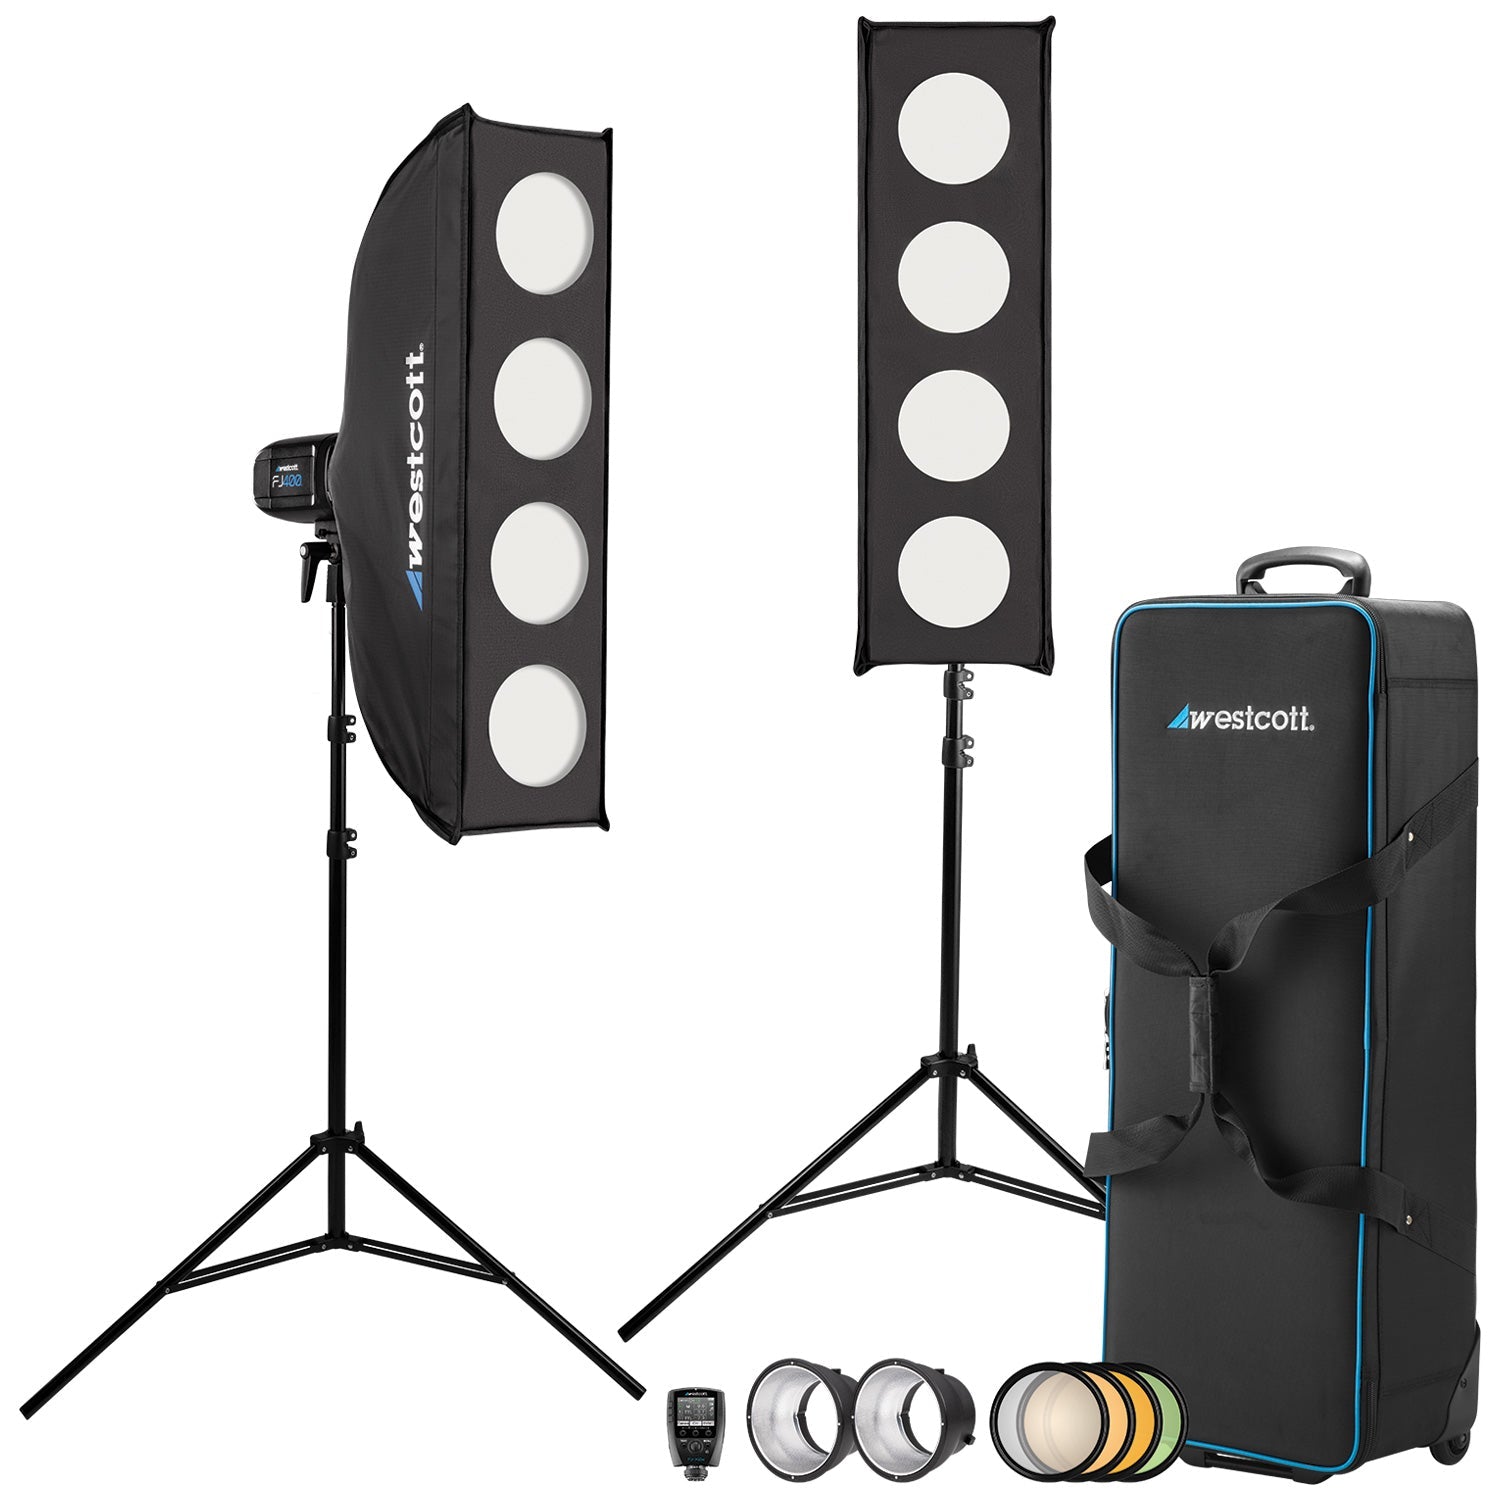 Westcott uLite LED 2-Light Collapsible Softbox Kit Professional Studio  Continuous Lighting for Photography， Video Conferencing， and Pr 買換応援 